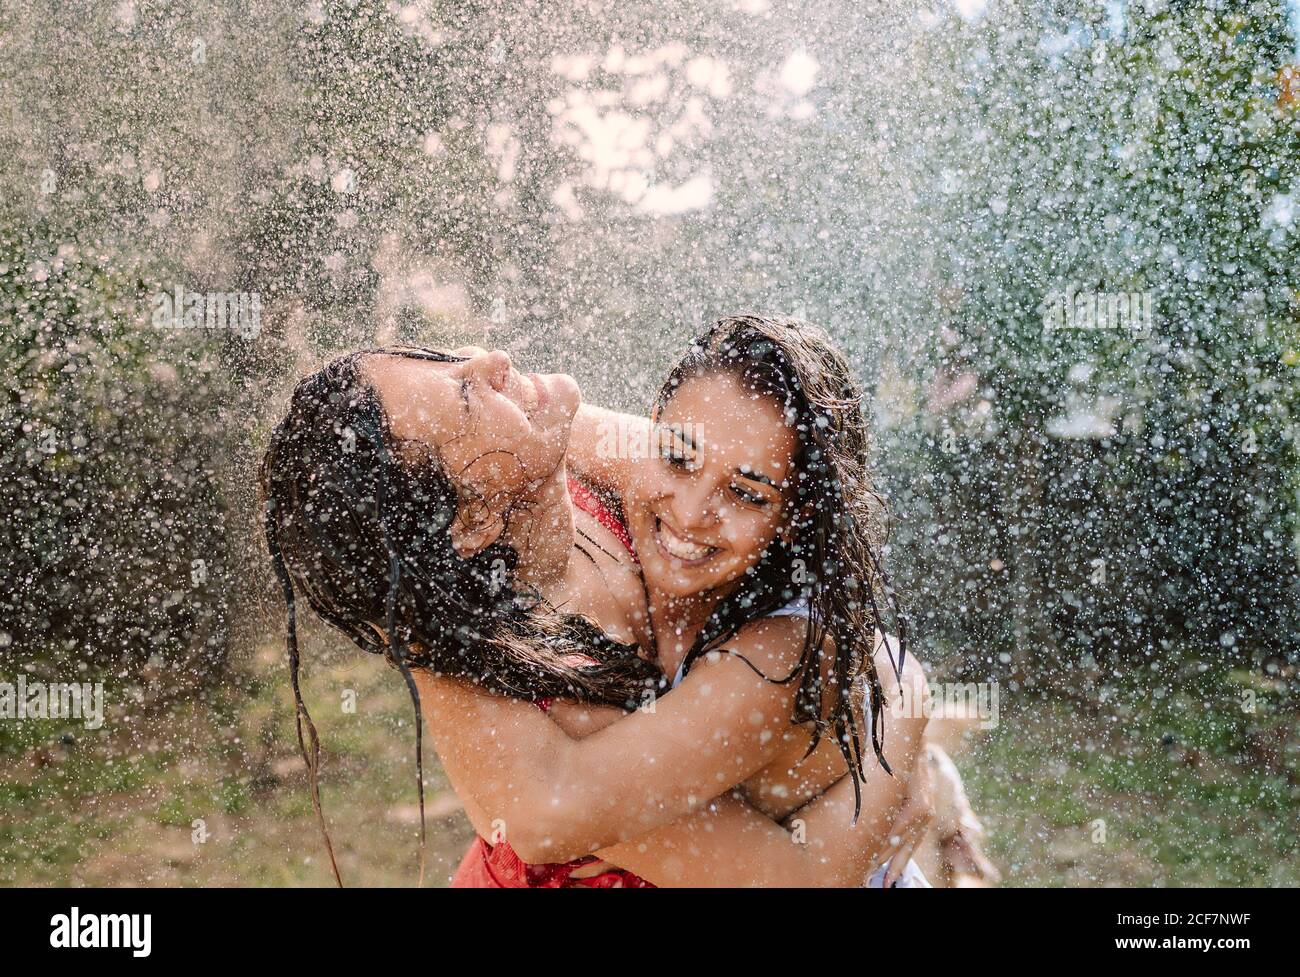 Friends in swimsuits hugging under water drops Stock Photo